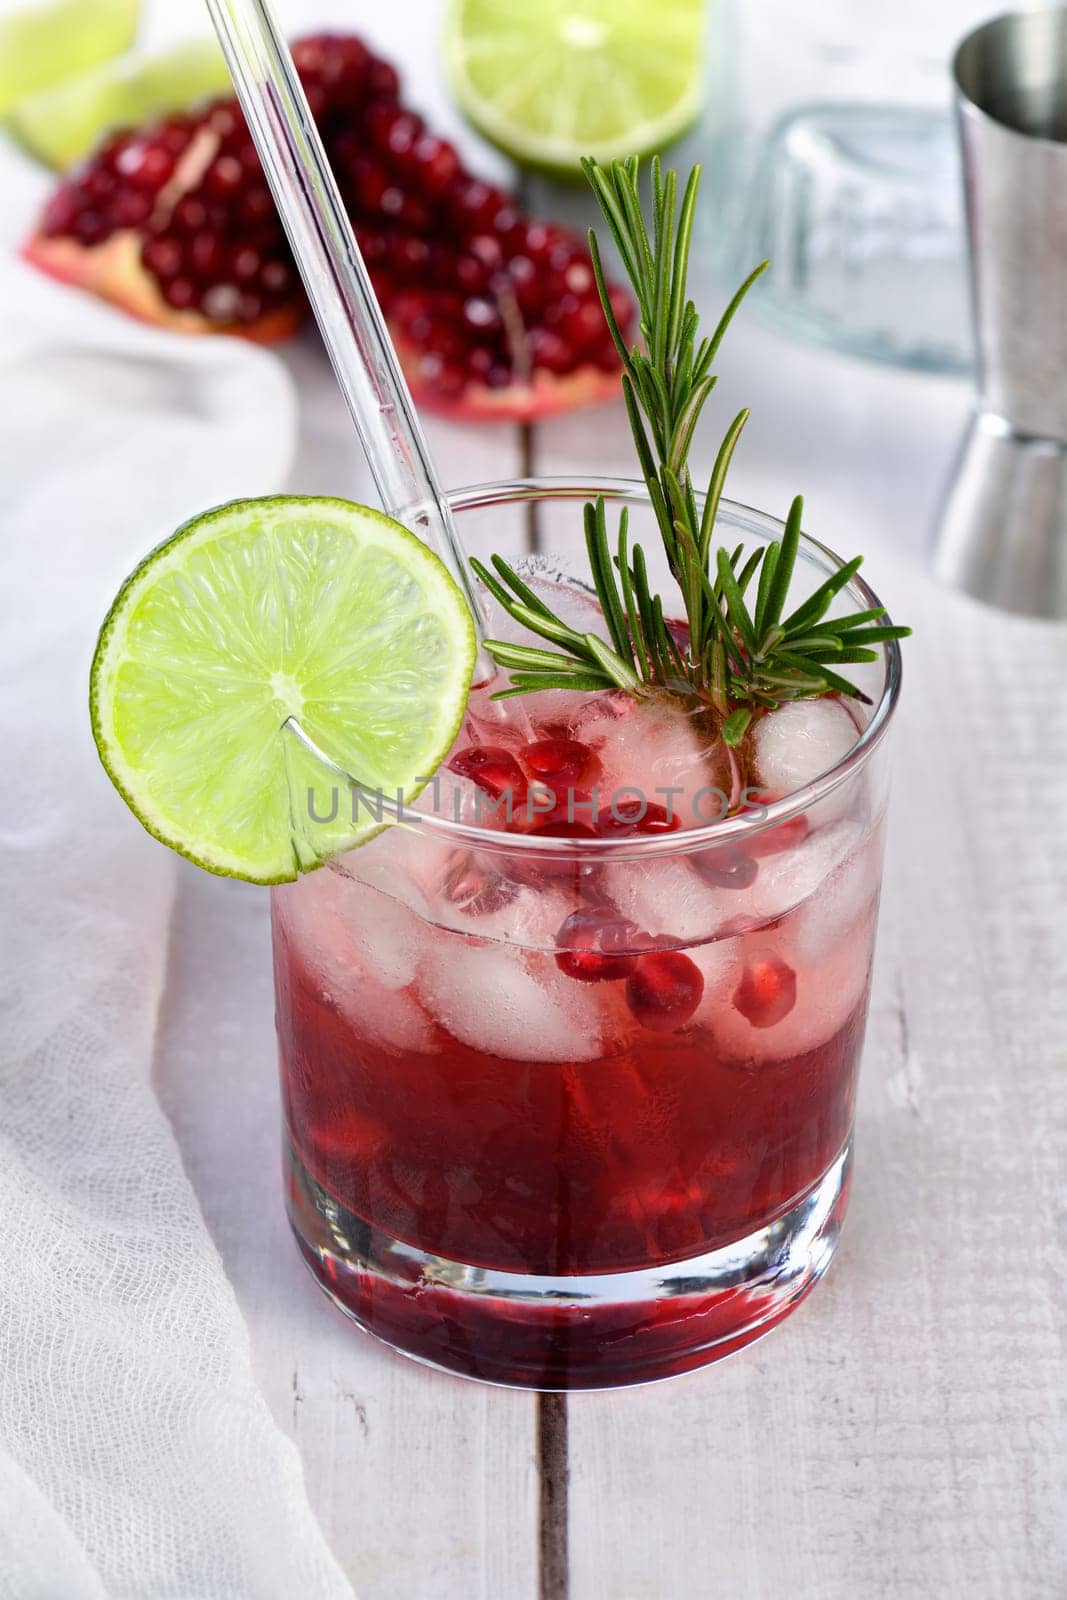 Festive note of the classic Pomegranate Paloma cocktail by Apolonia